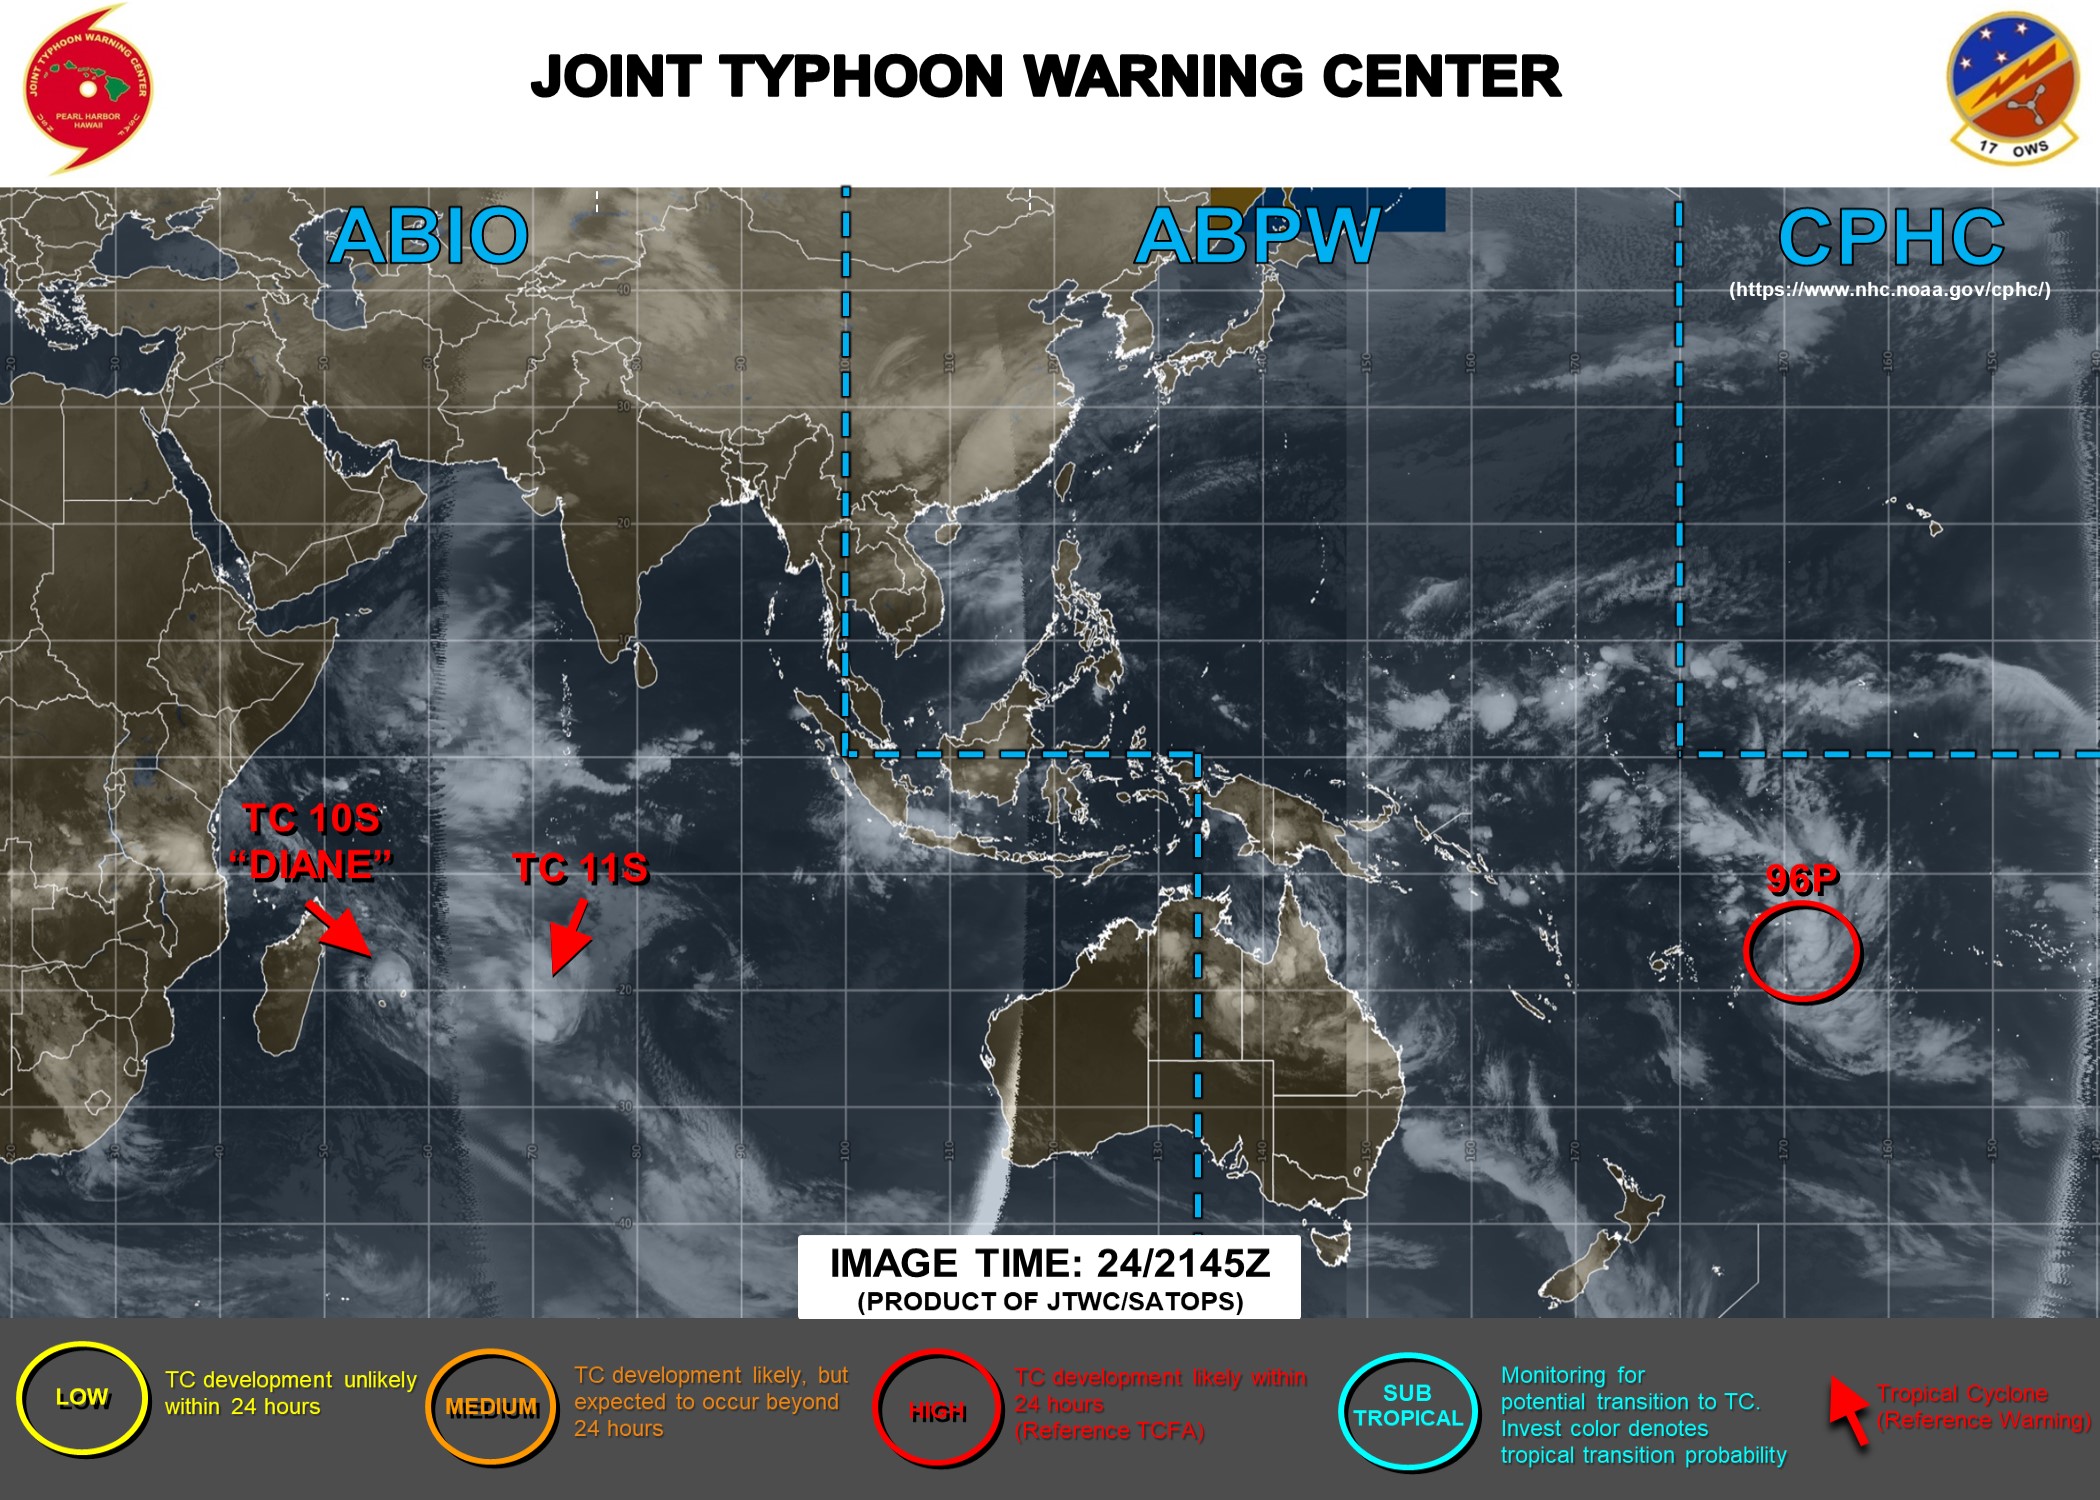 South Pacific: Invest 96P: Tropical Cyclone Formation Alert